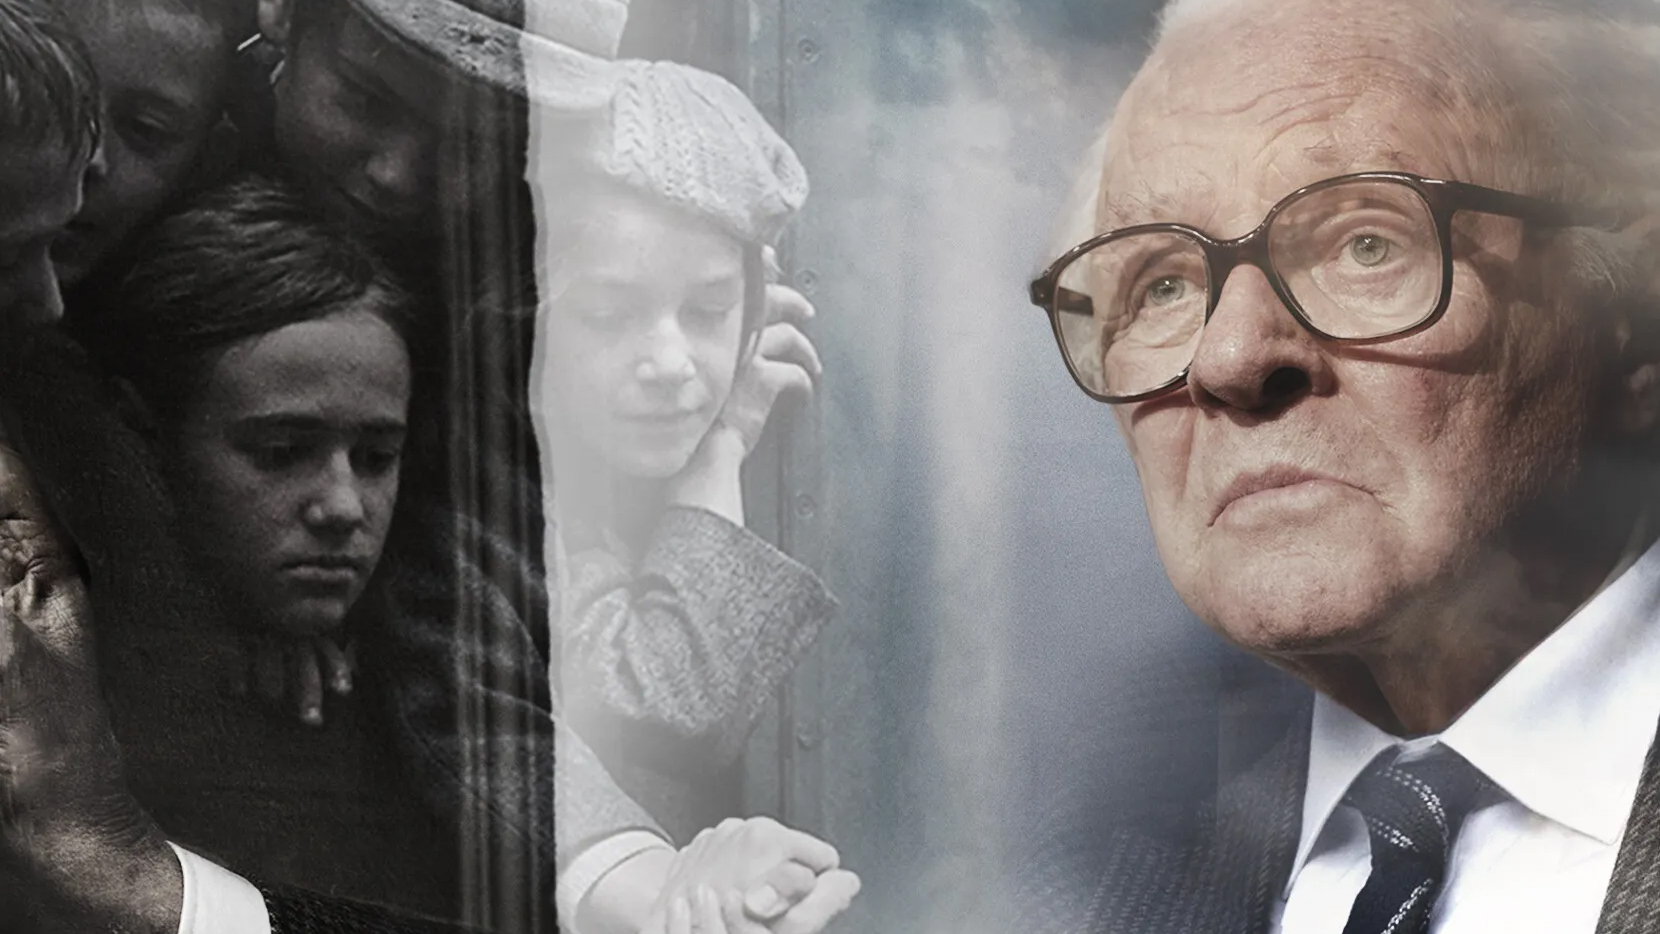 Excerpt from the movie poster for "One Life", with a portrait shot of Anthony Hopkins' character on the right, details from a railway station scene on the left